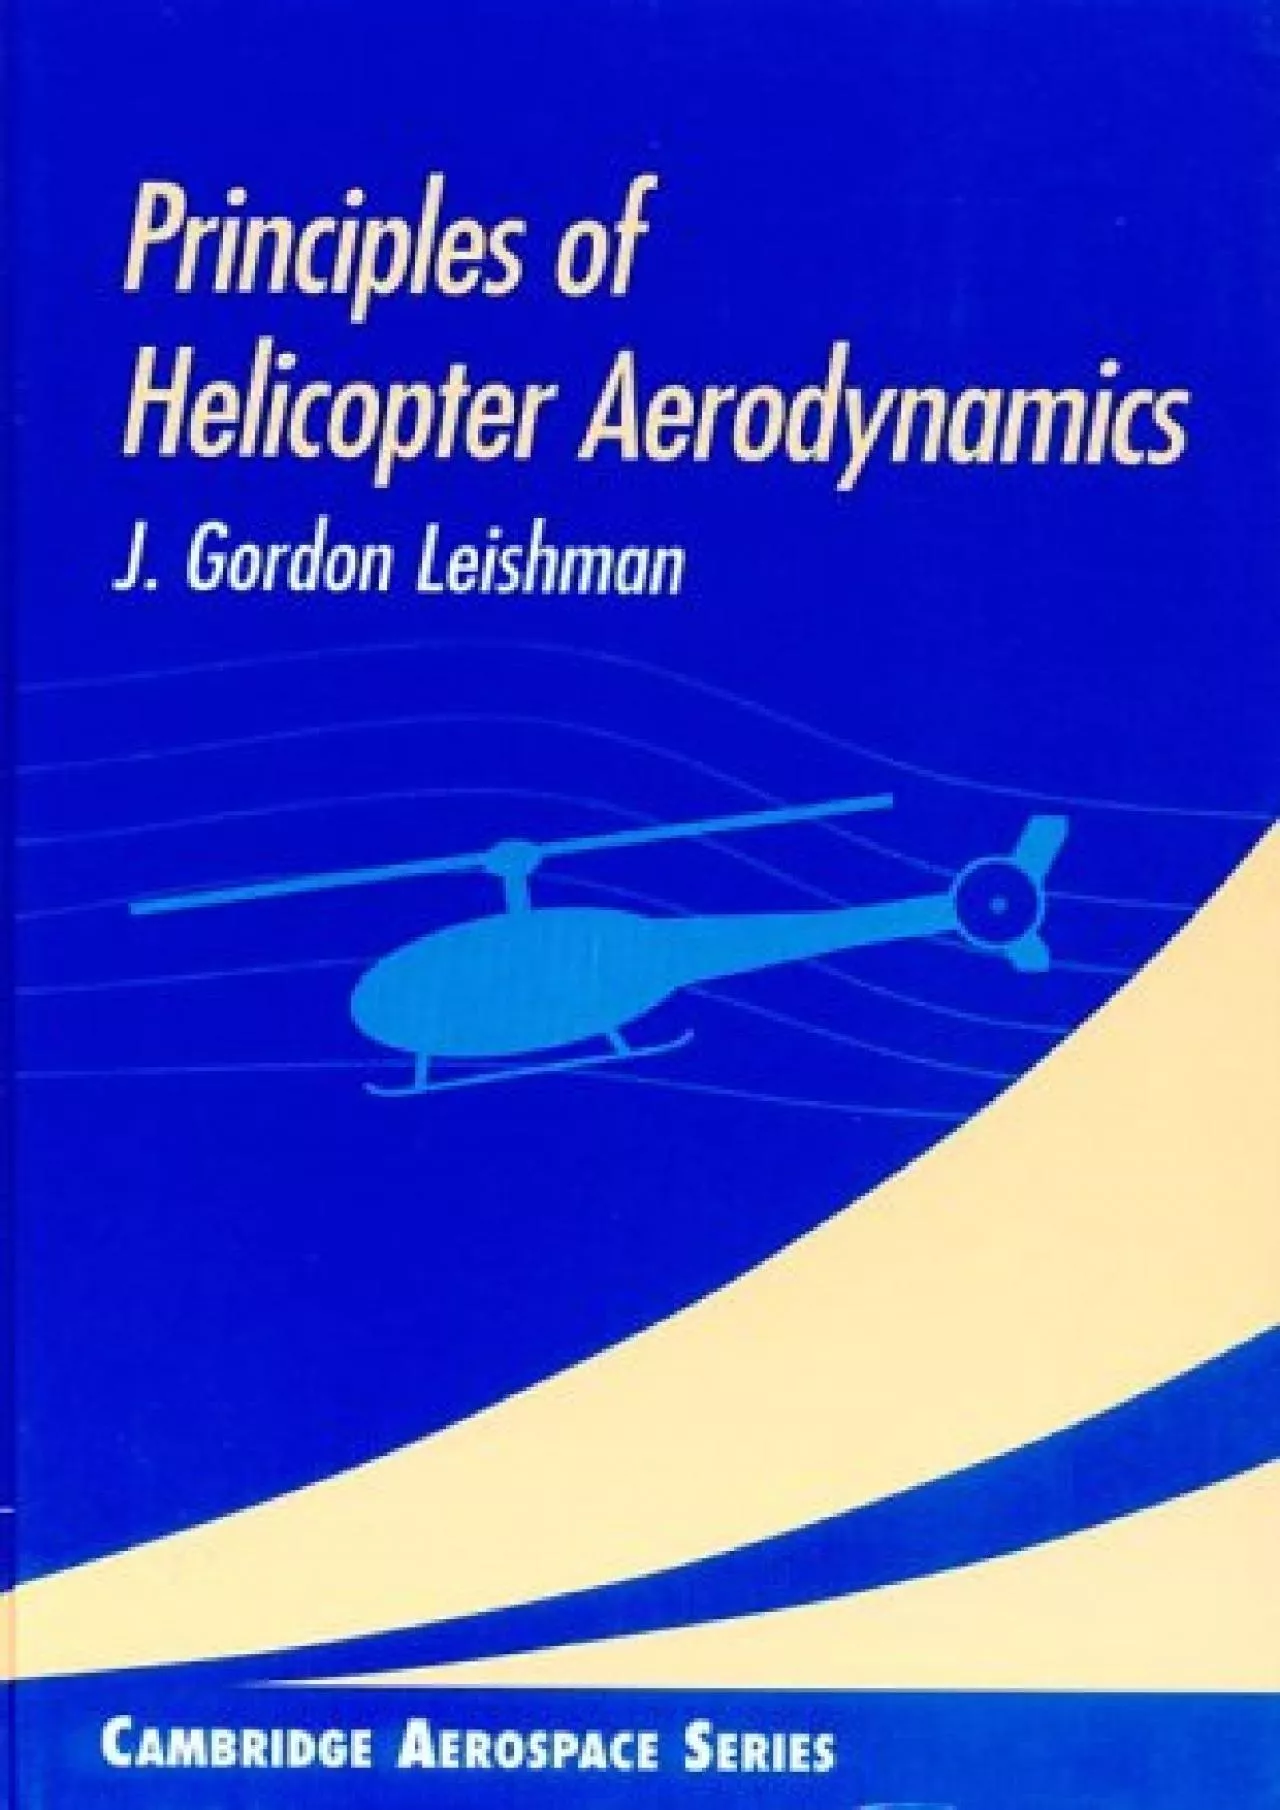 (DOWNLOAD)-Principles of Helicopter Aerodynamics (Cambridge Aerospace Series, Series Number